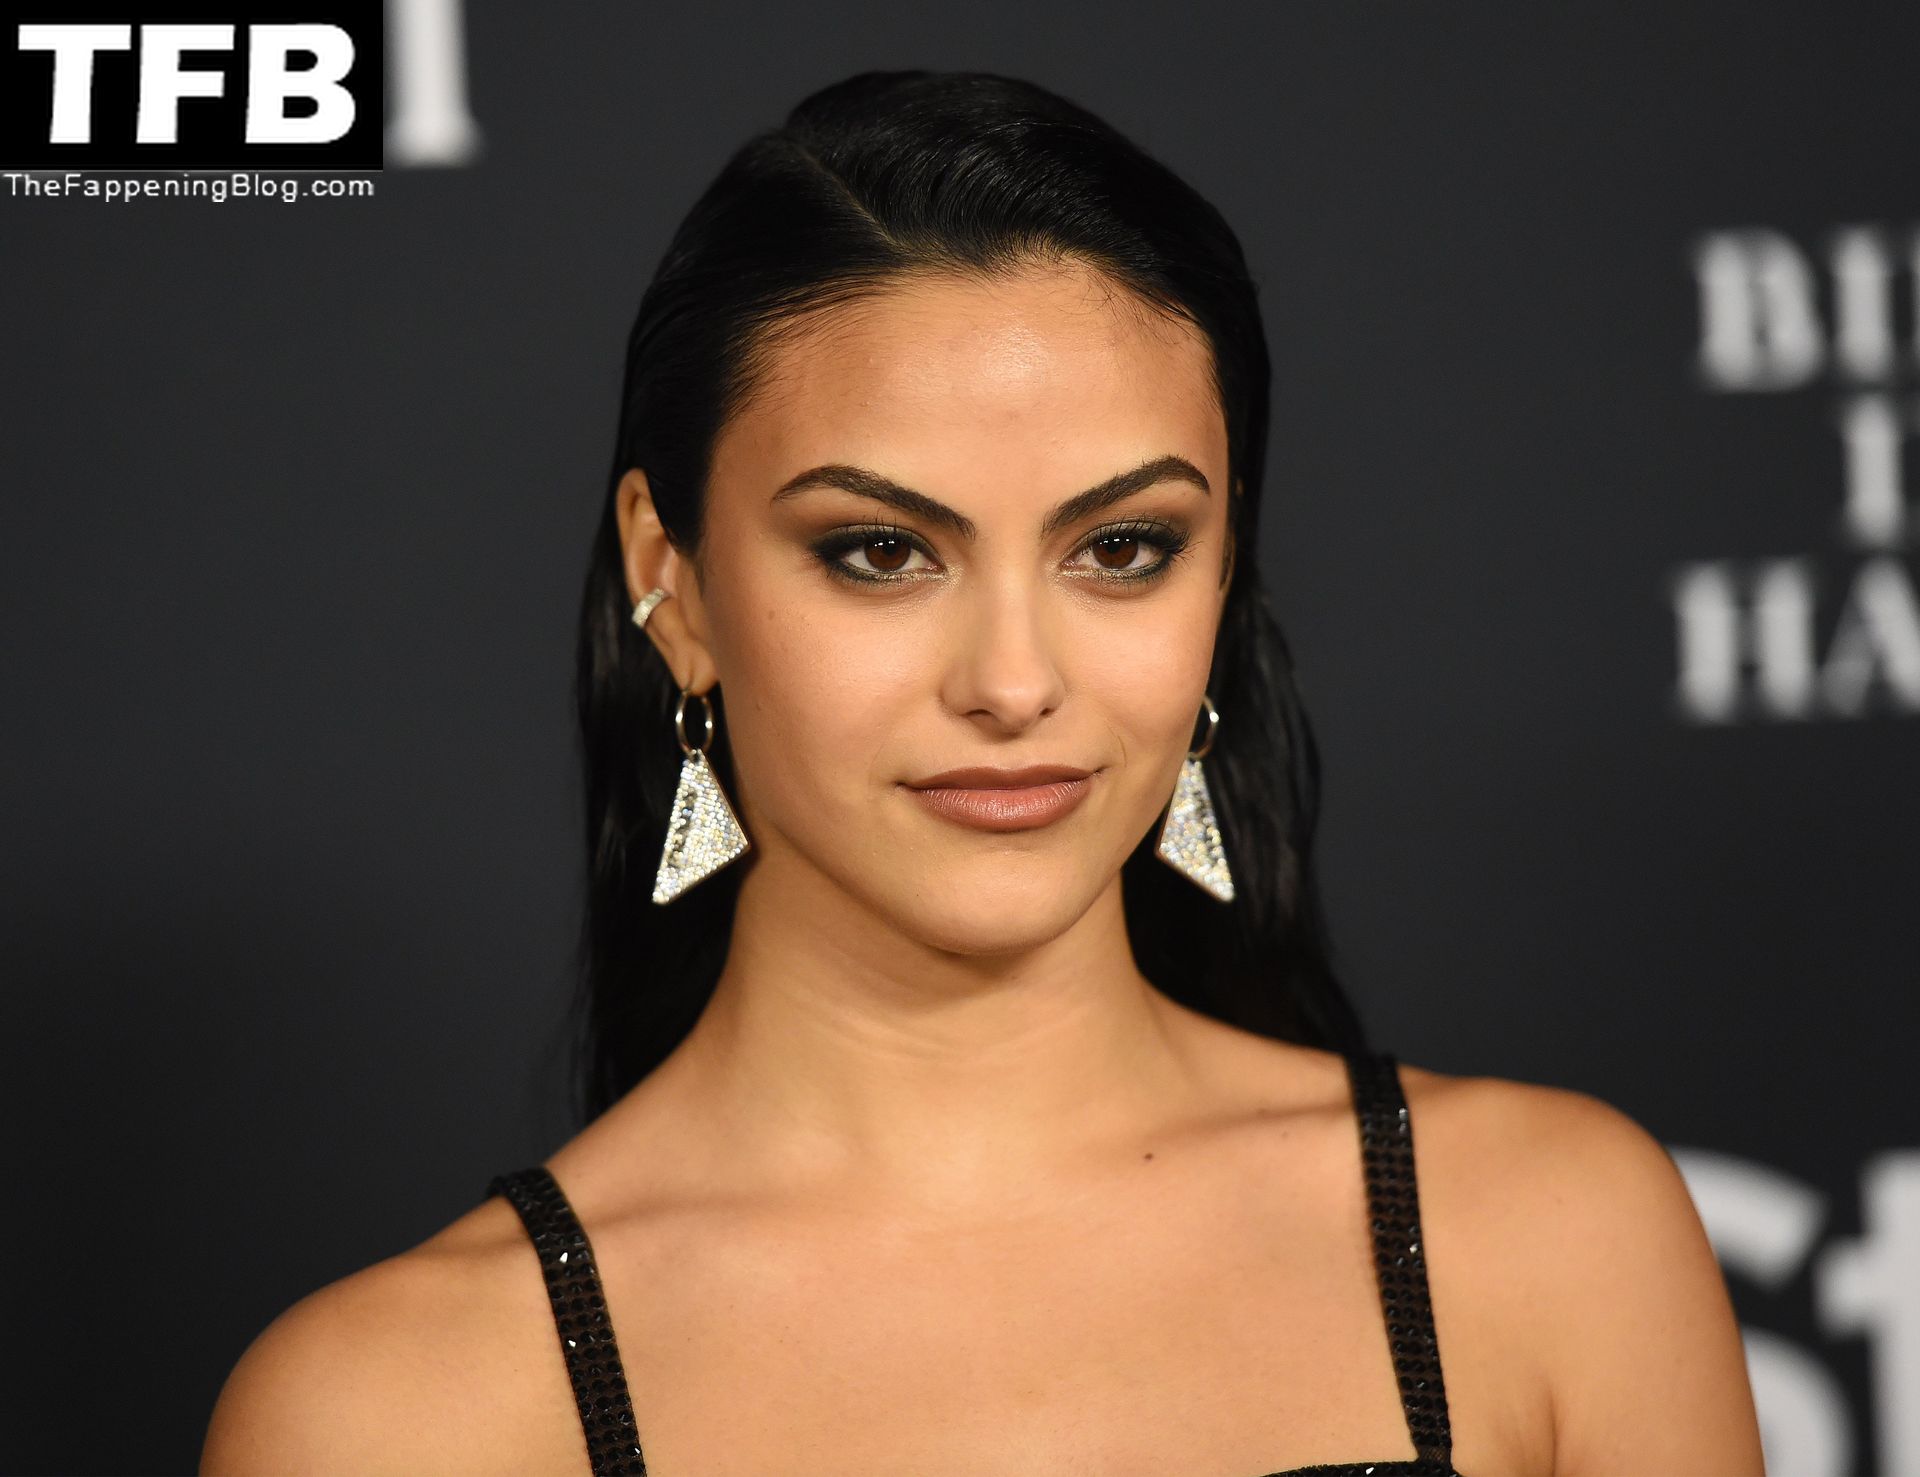 Camila-Mendes-See-Through-Tits-The-Fappening-Blog-68.jpg